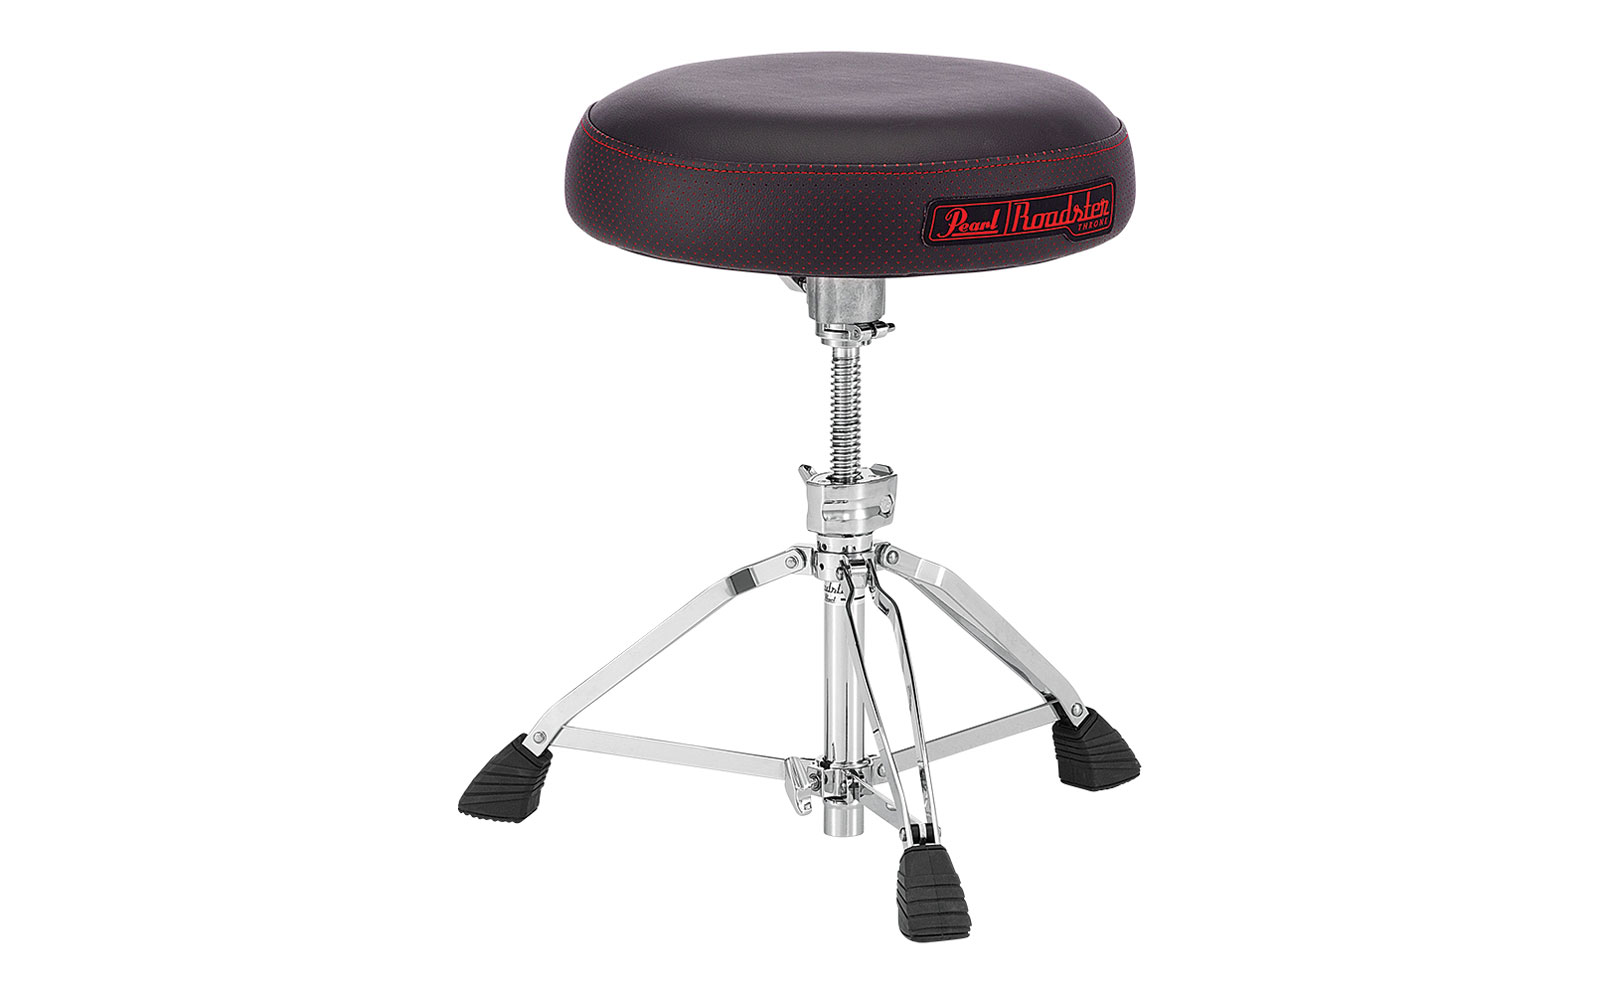 PEARL DRUMS HARDWARE DRUM THRONE ROADSTER D-1500S COURT